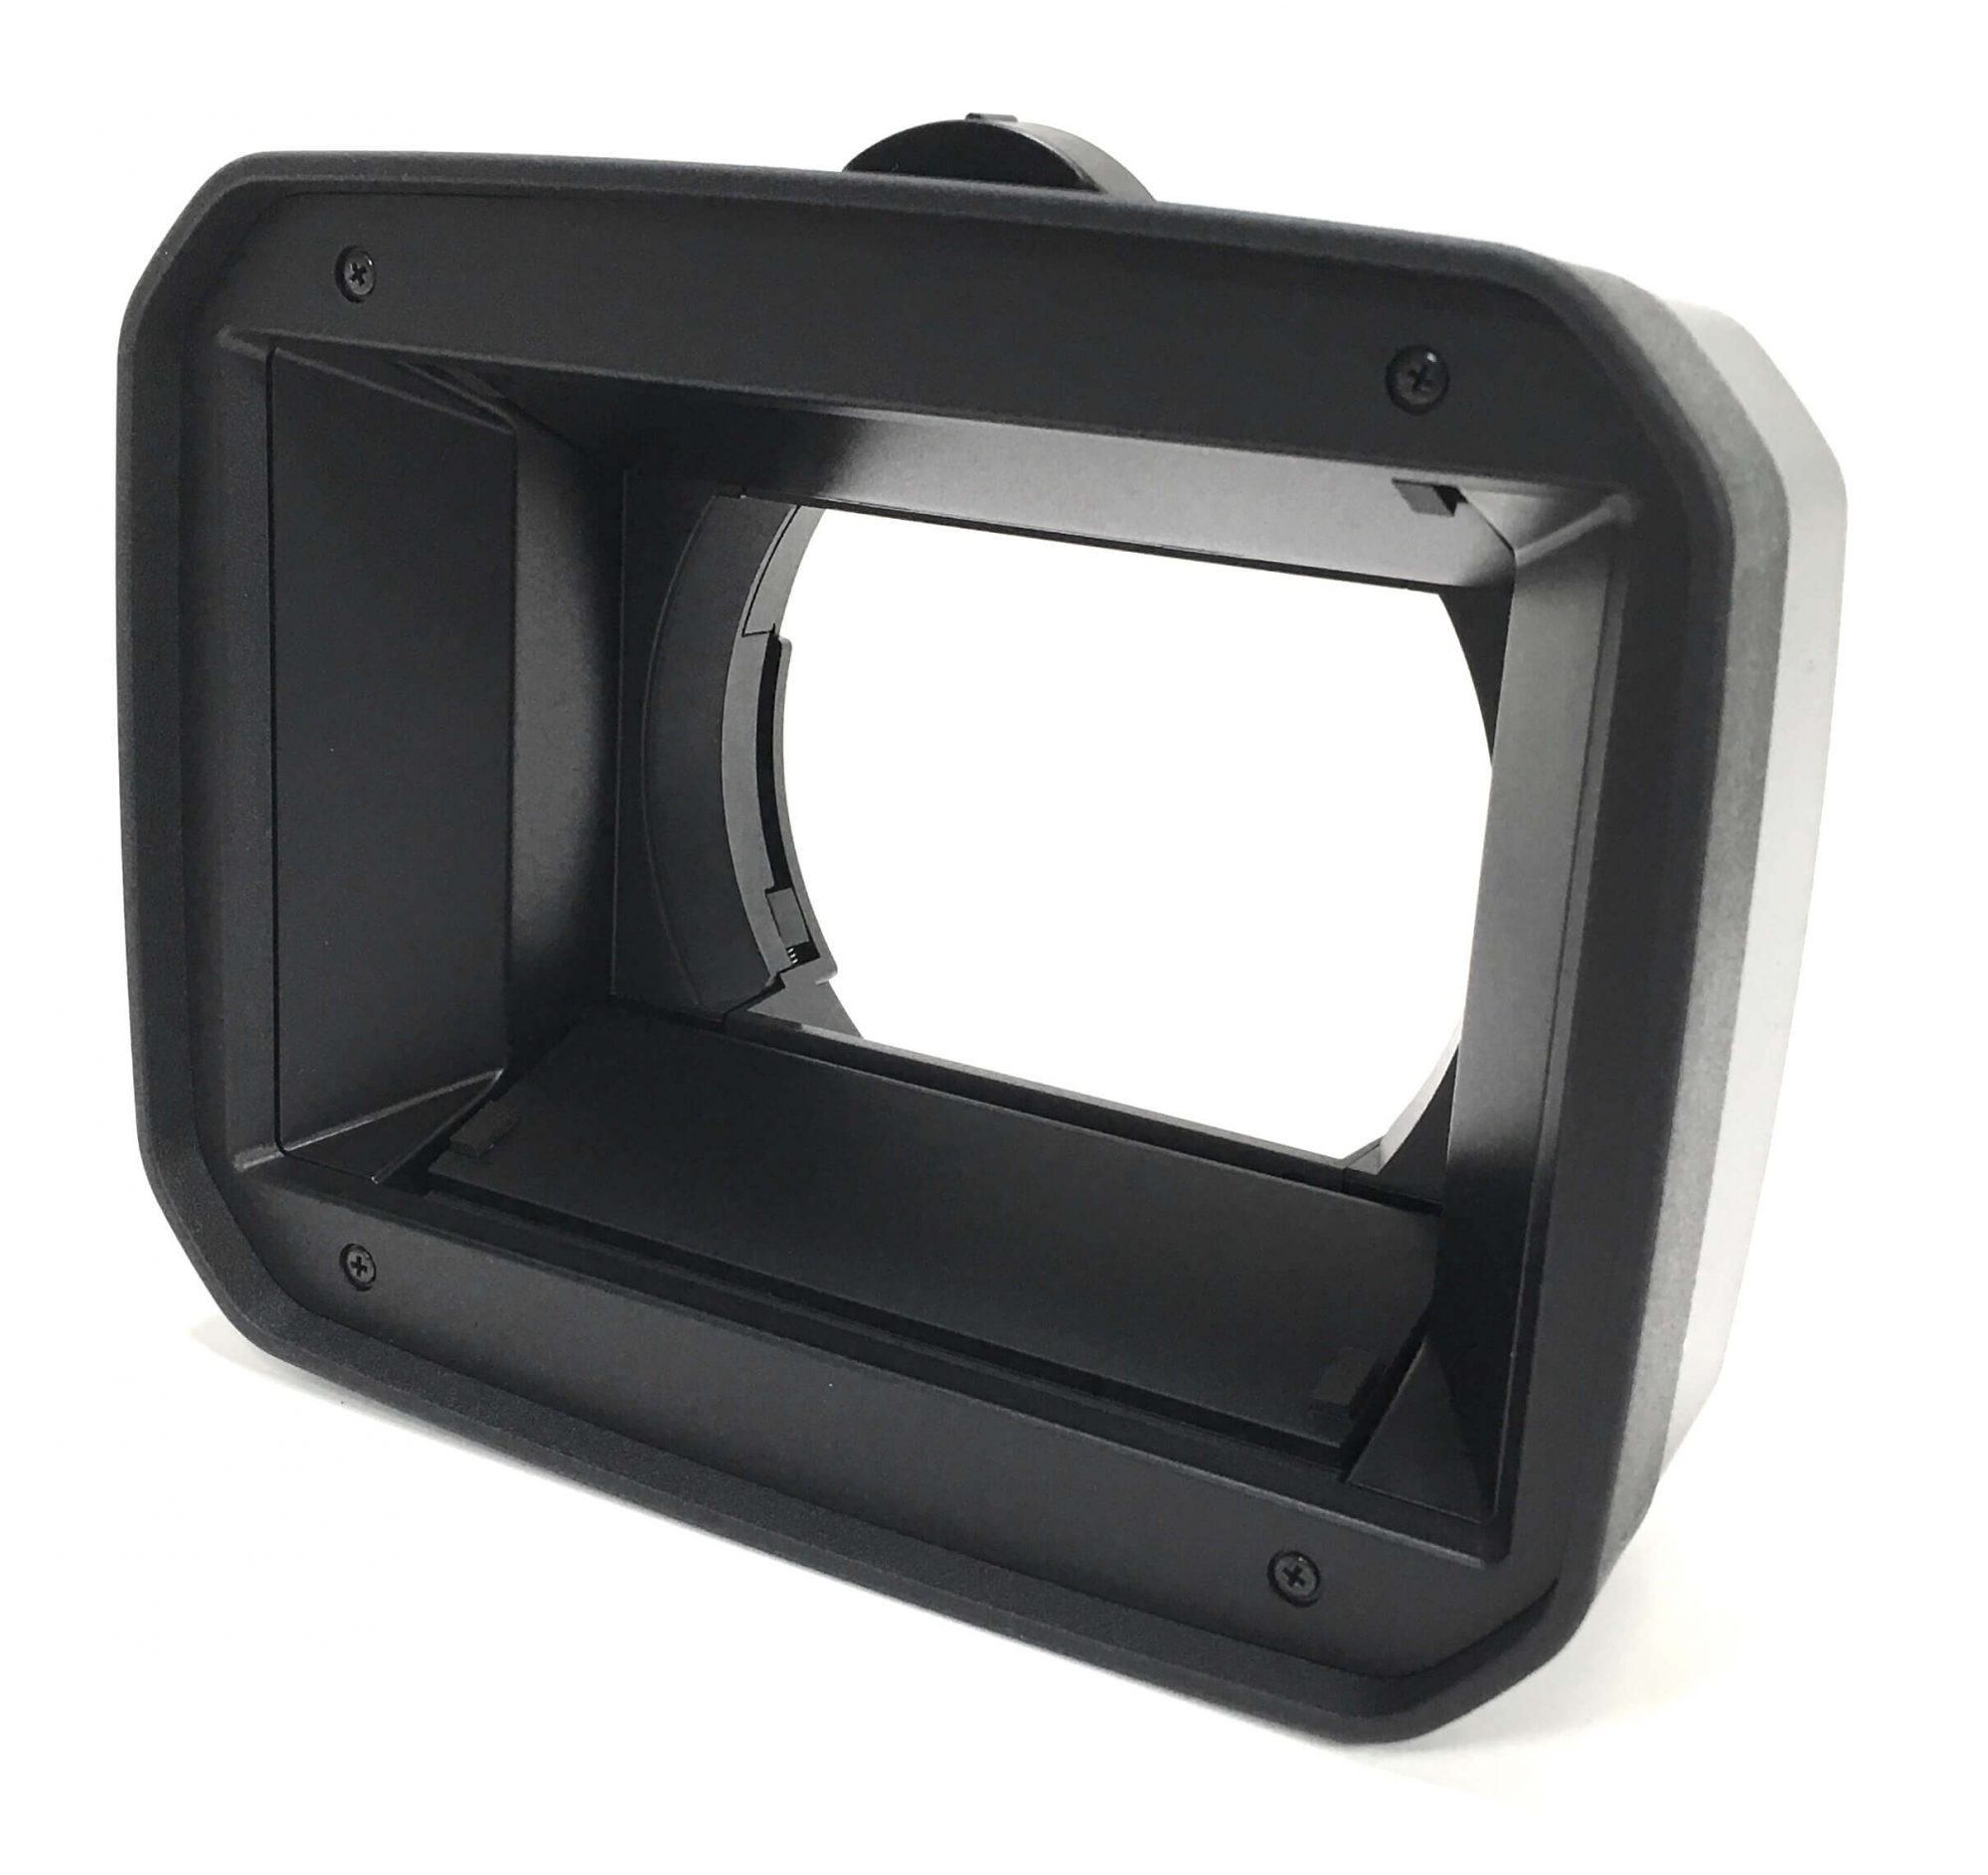 Original Lens Hood with Shutter for the Sony HDR-FX1000 camcorder. It is a genuine Sony part, sourced directly from Sony USA. Brand new factory fresh. Free Shipping.